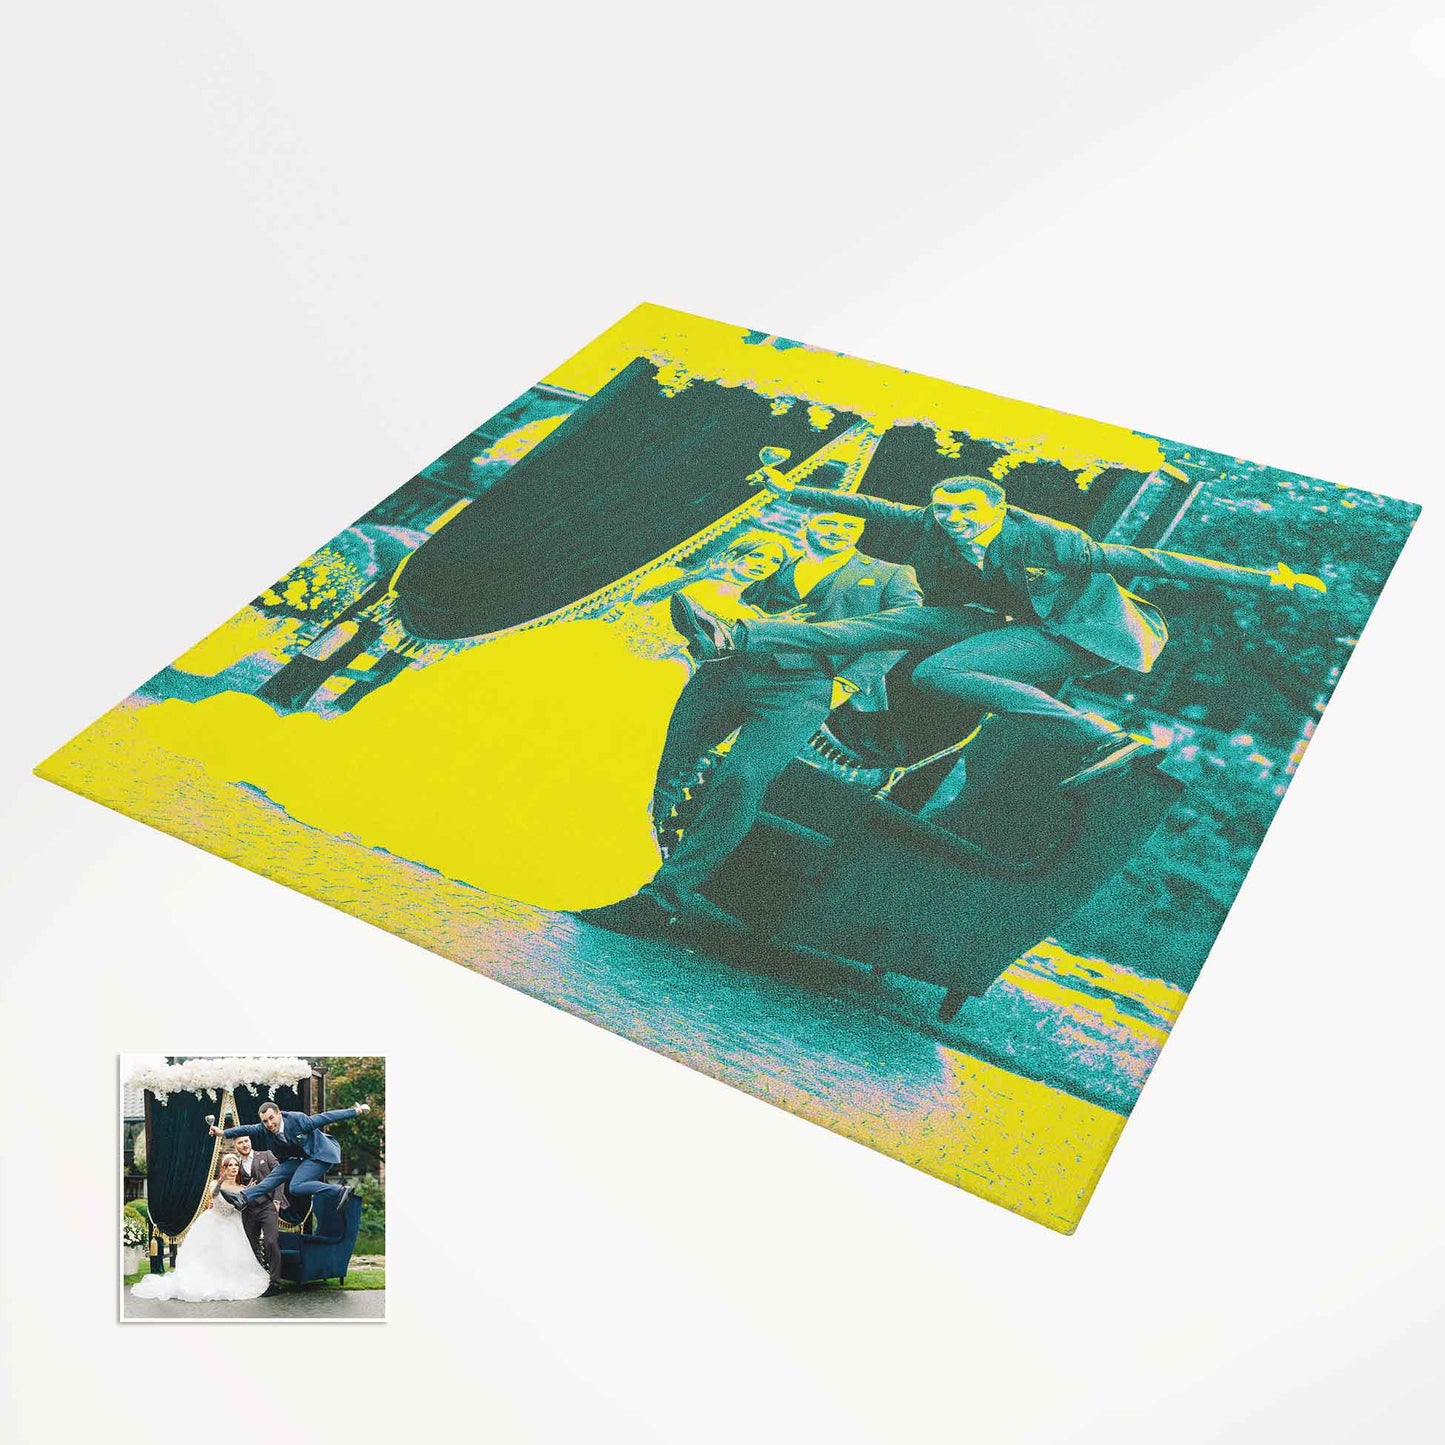 Brighten up your home with our Personalised Acid Yellow Photo Rug. Customisable and chic, it's the perfect addition to any modern interior